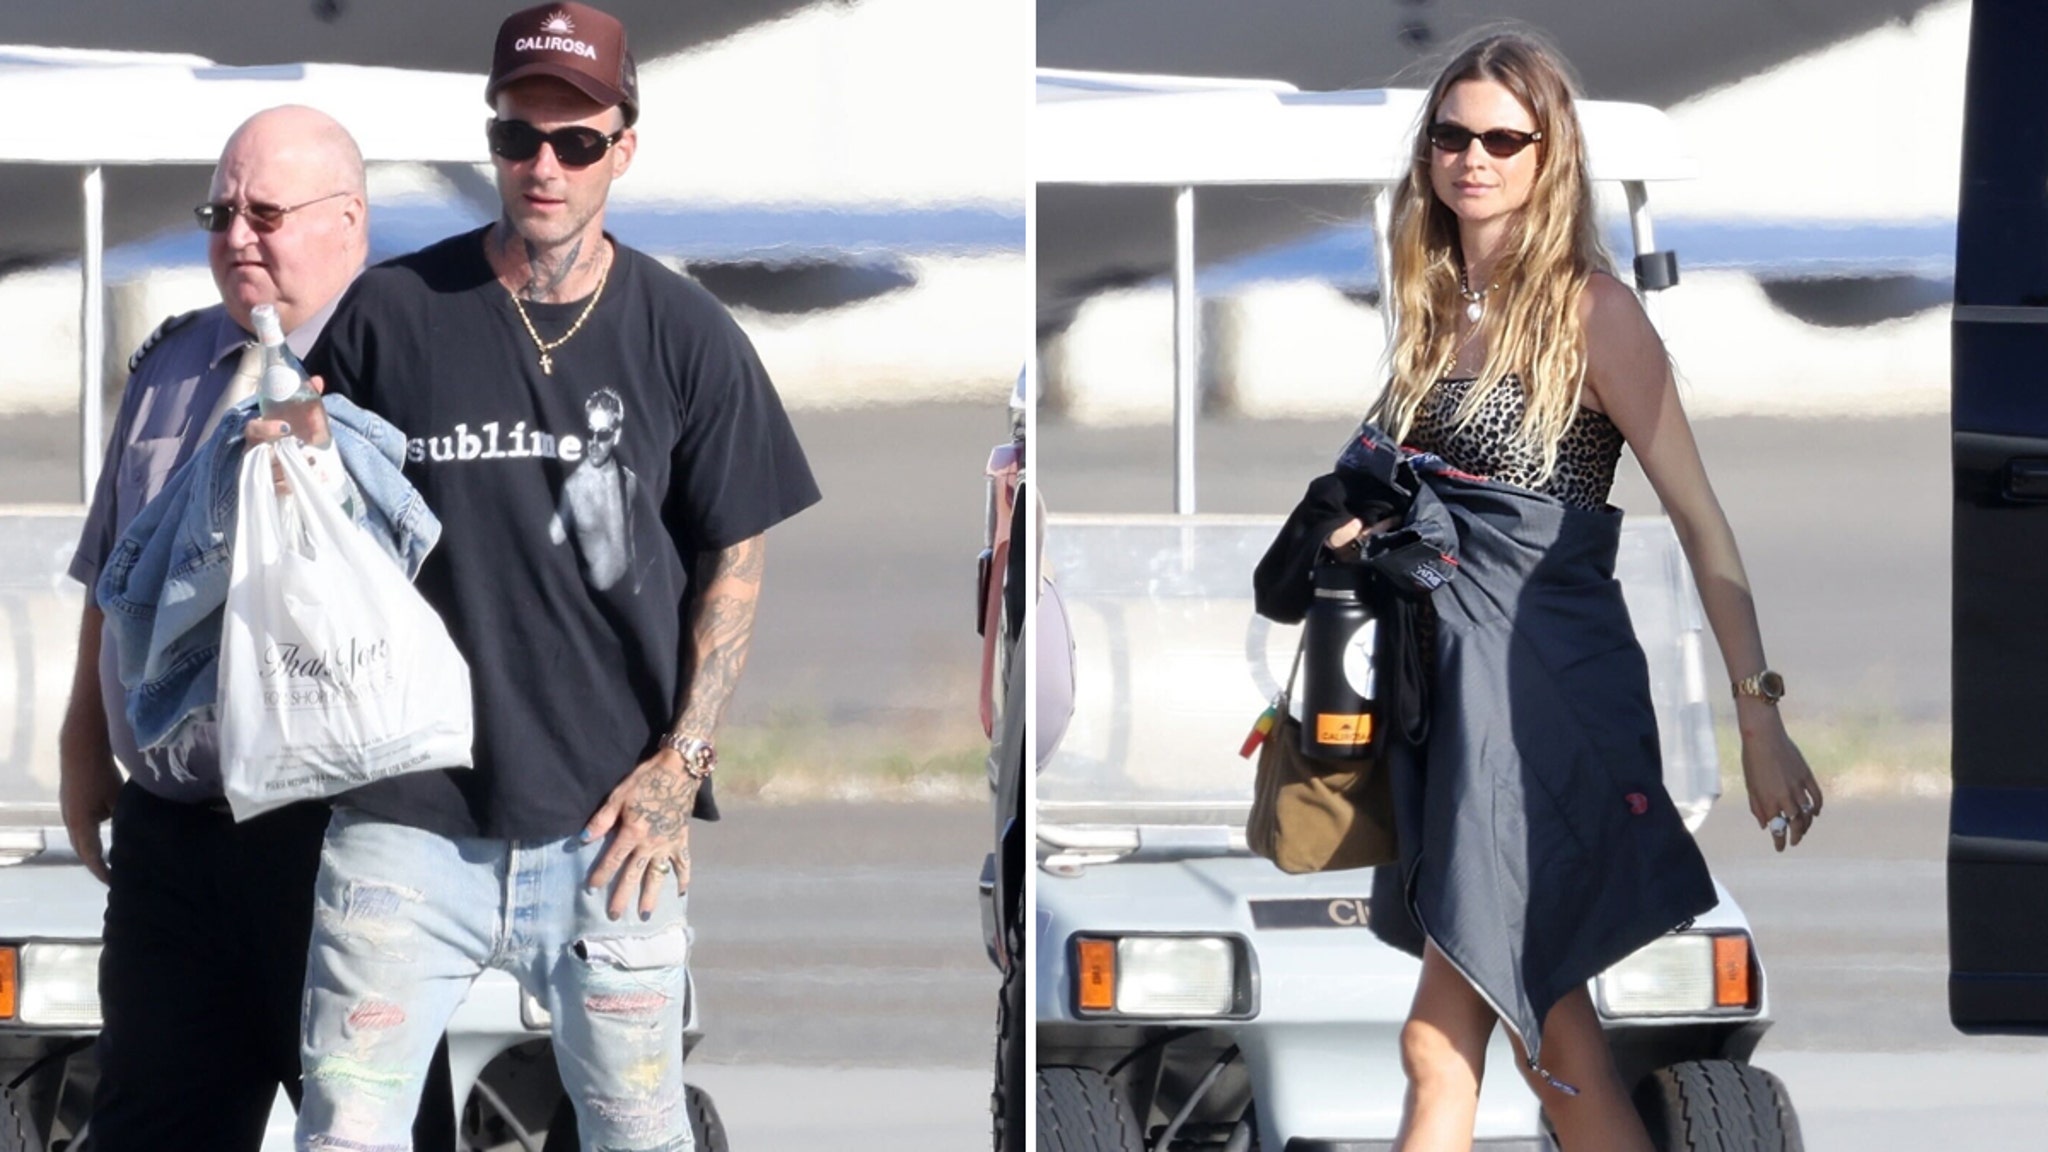 Adam Levine and Wife Behati Prinsloo Showing United Front After Cheating Scandal thumbnail